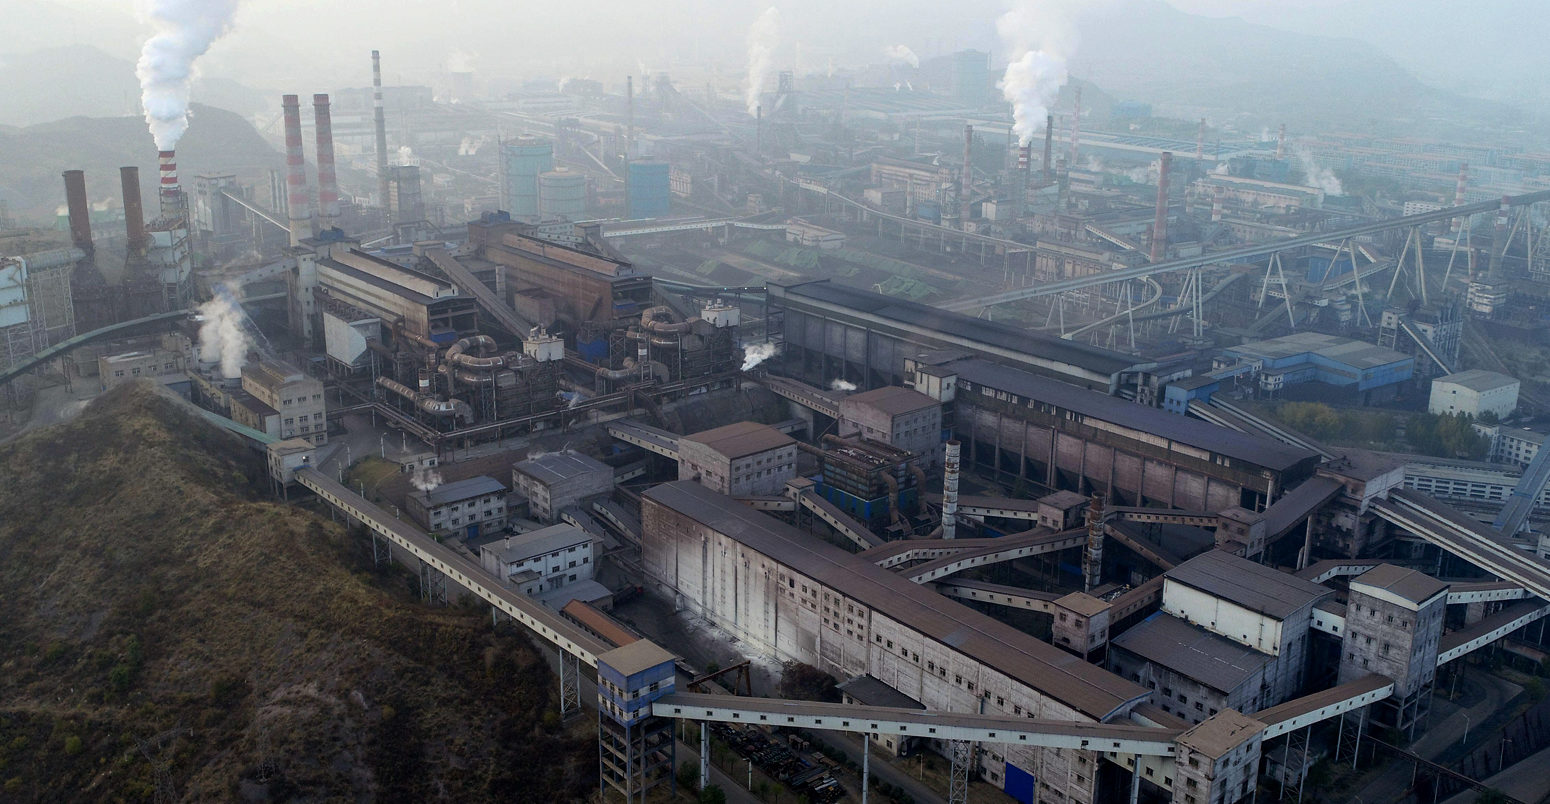 Aerial view of coal plant in Chengde, China, 12 December 2019. Credit: Bonandbon / Alamy Stock Photo.